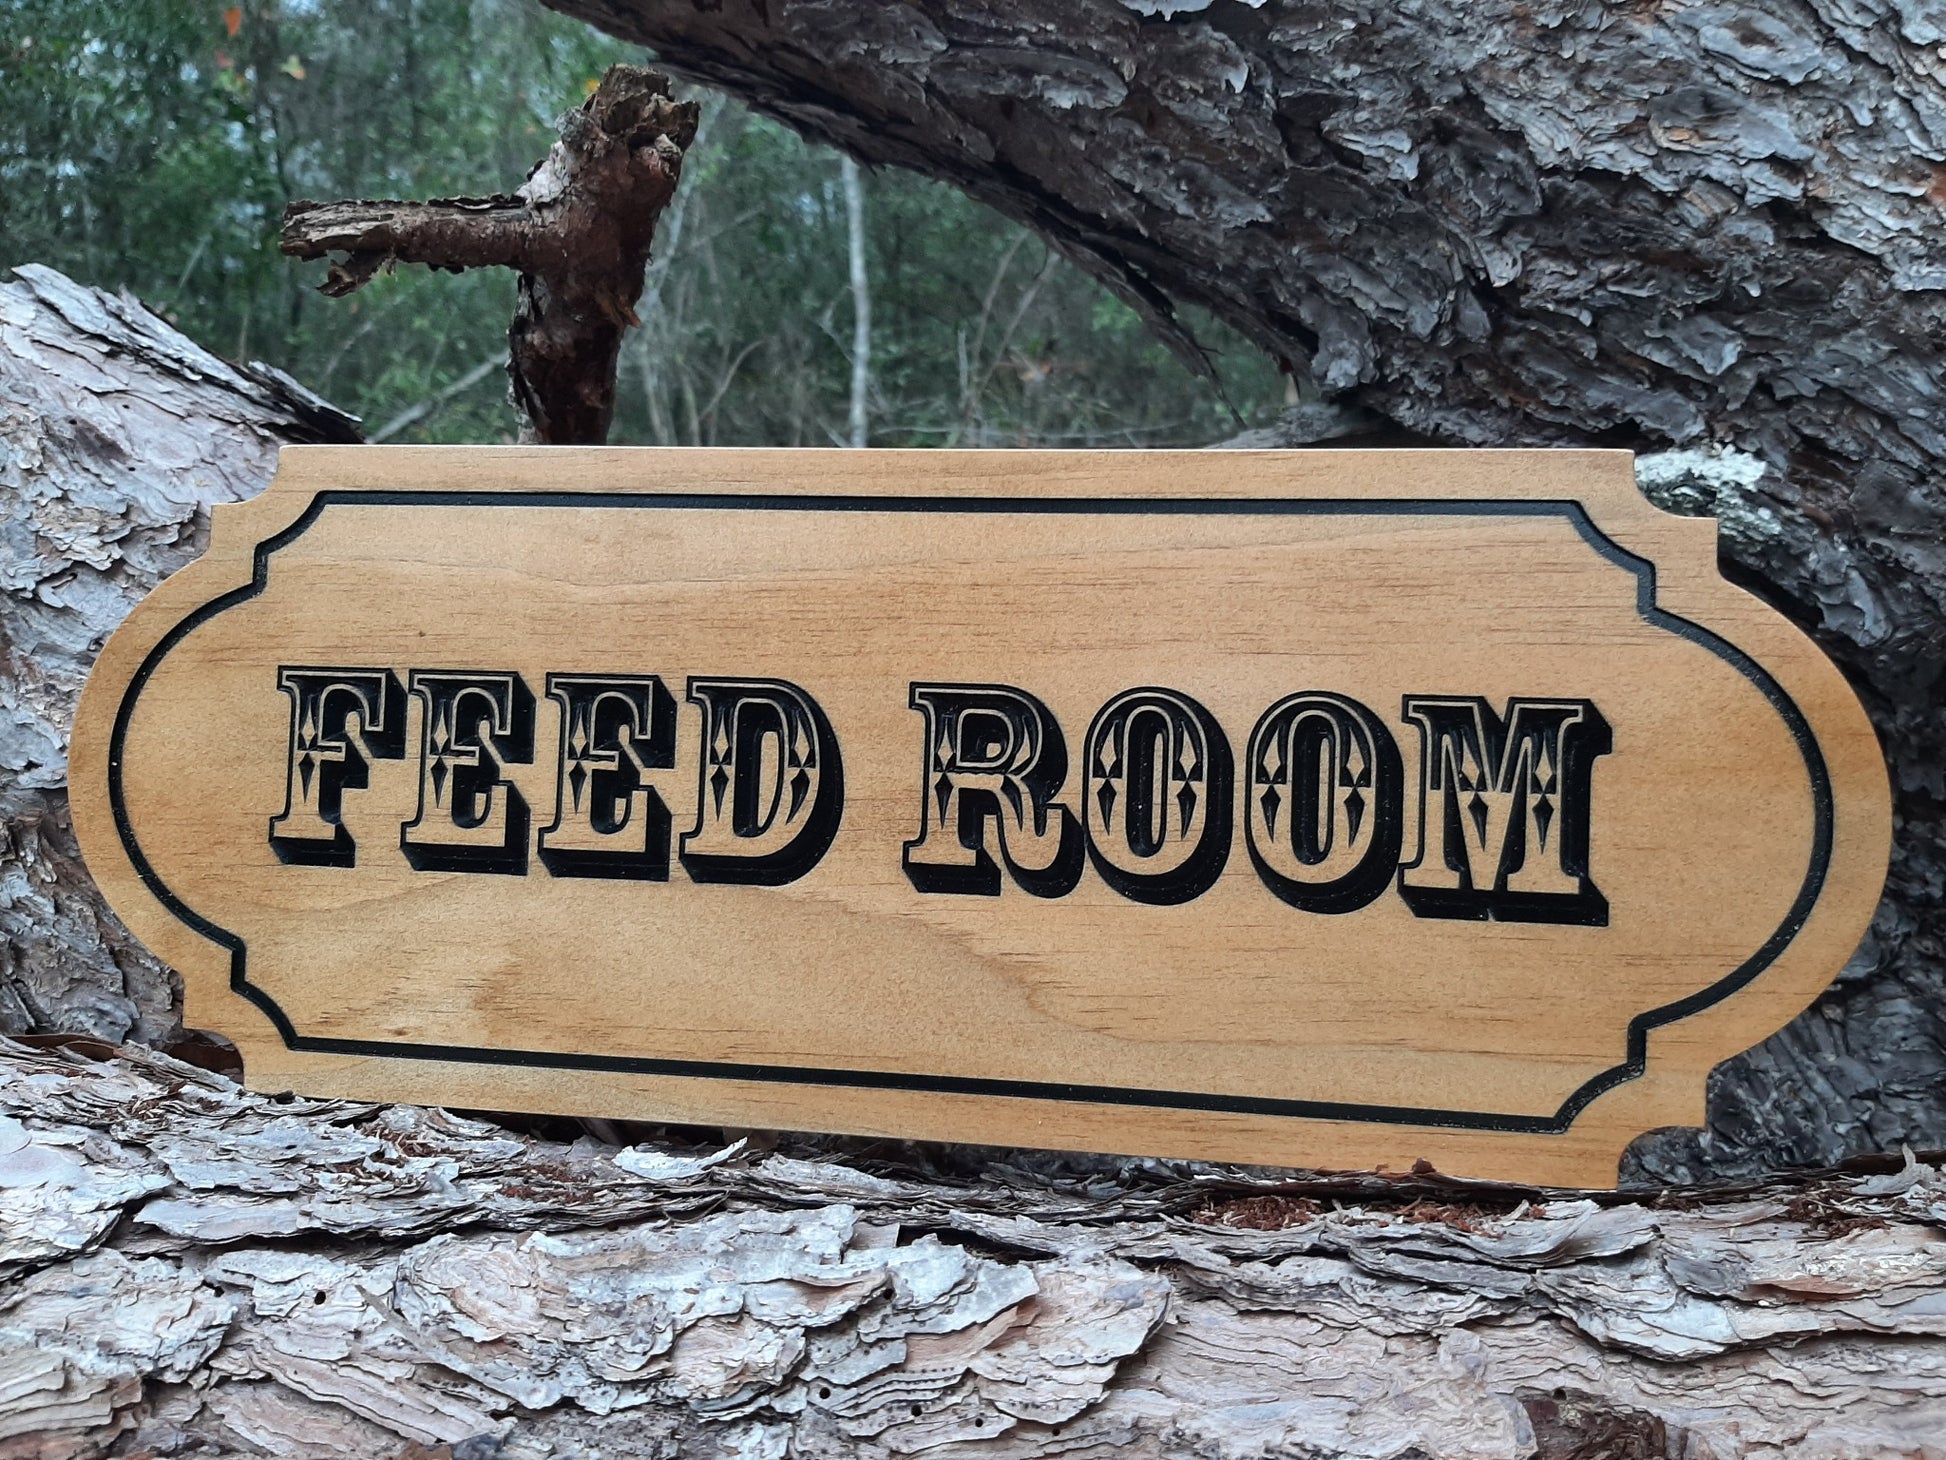 16" Tack room door sign made in the USA